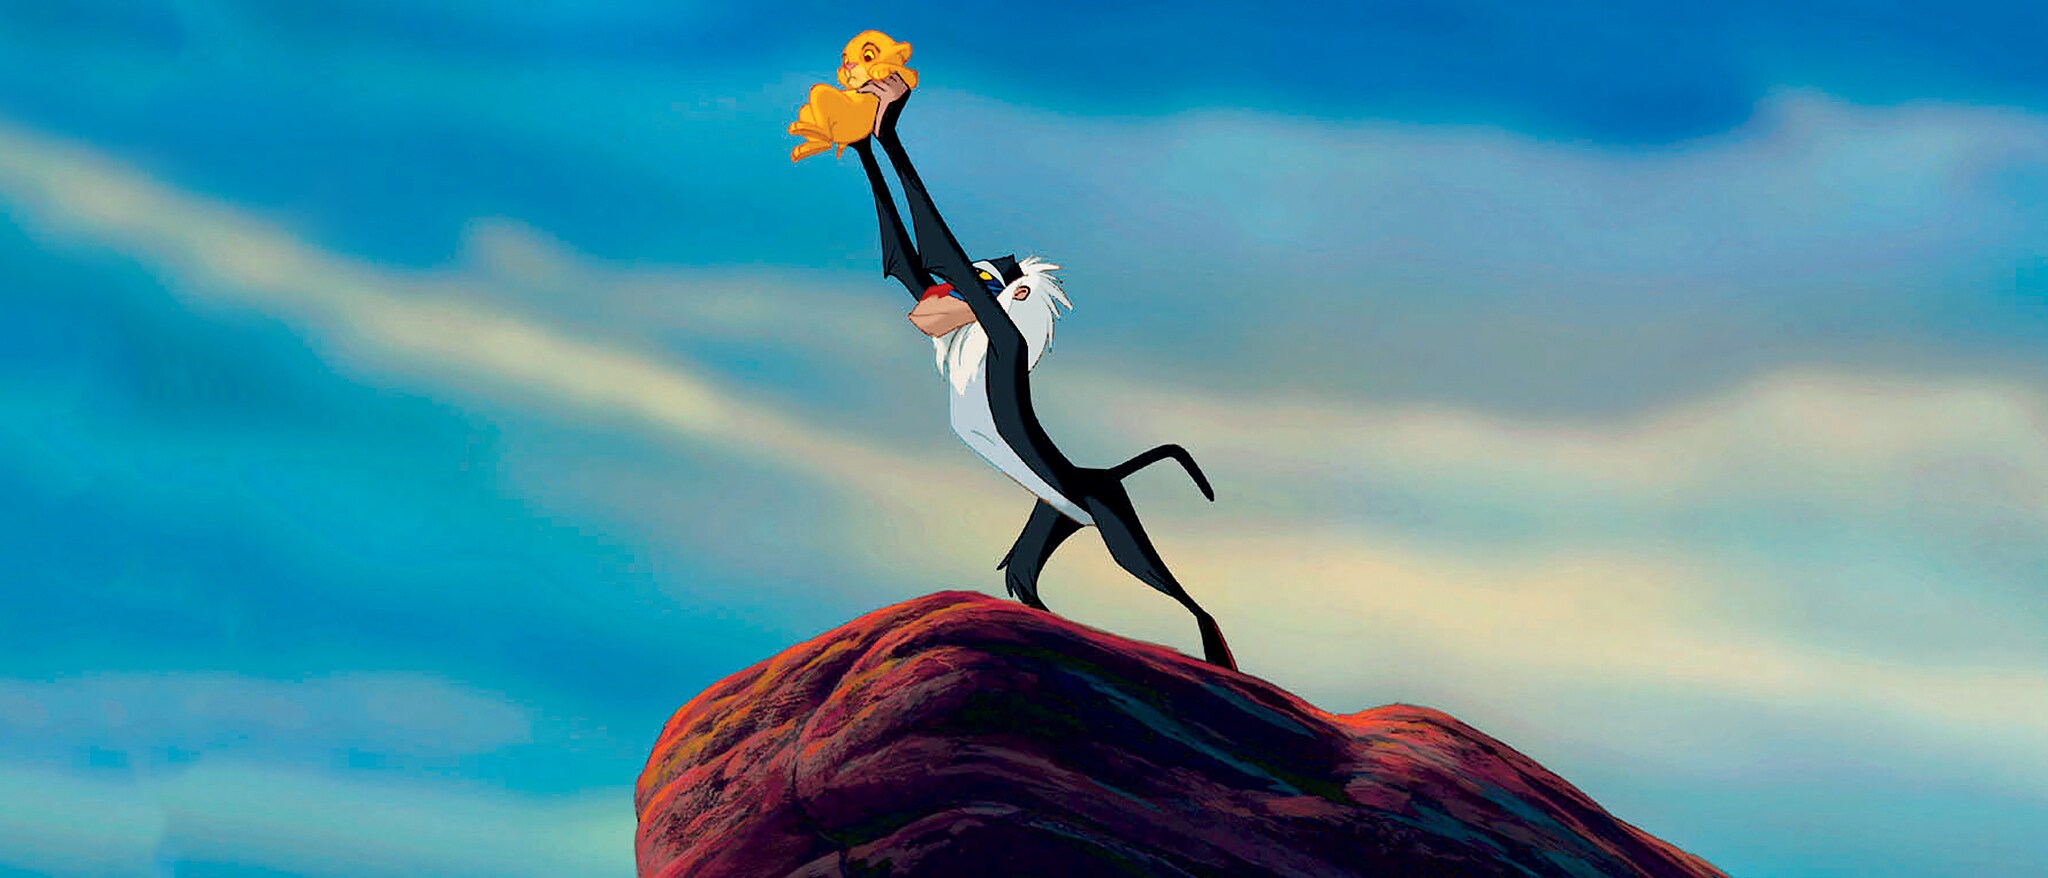 stream the lion king free online